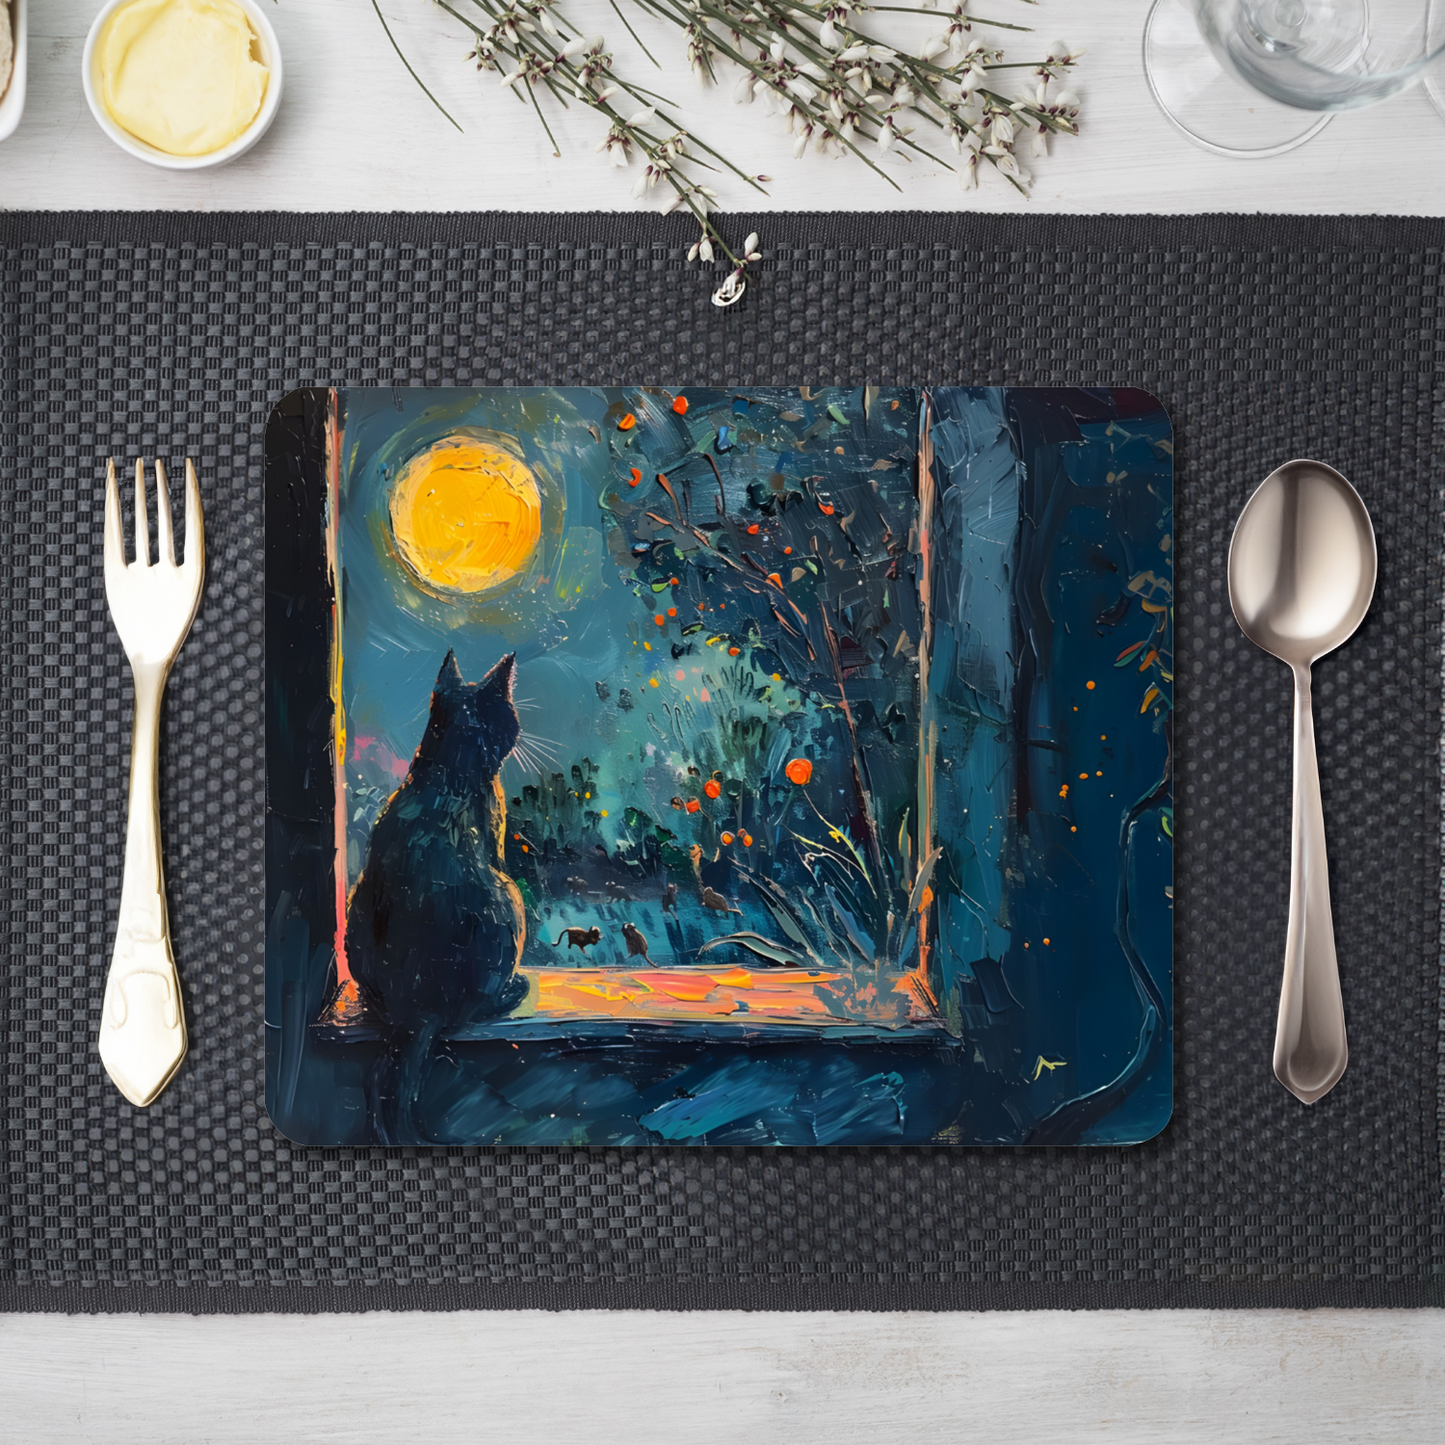 Window to the Wild Wooden Placemat